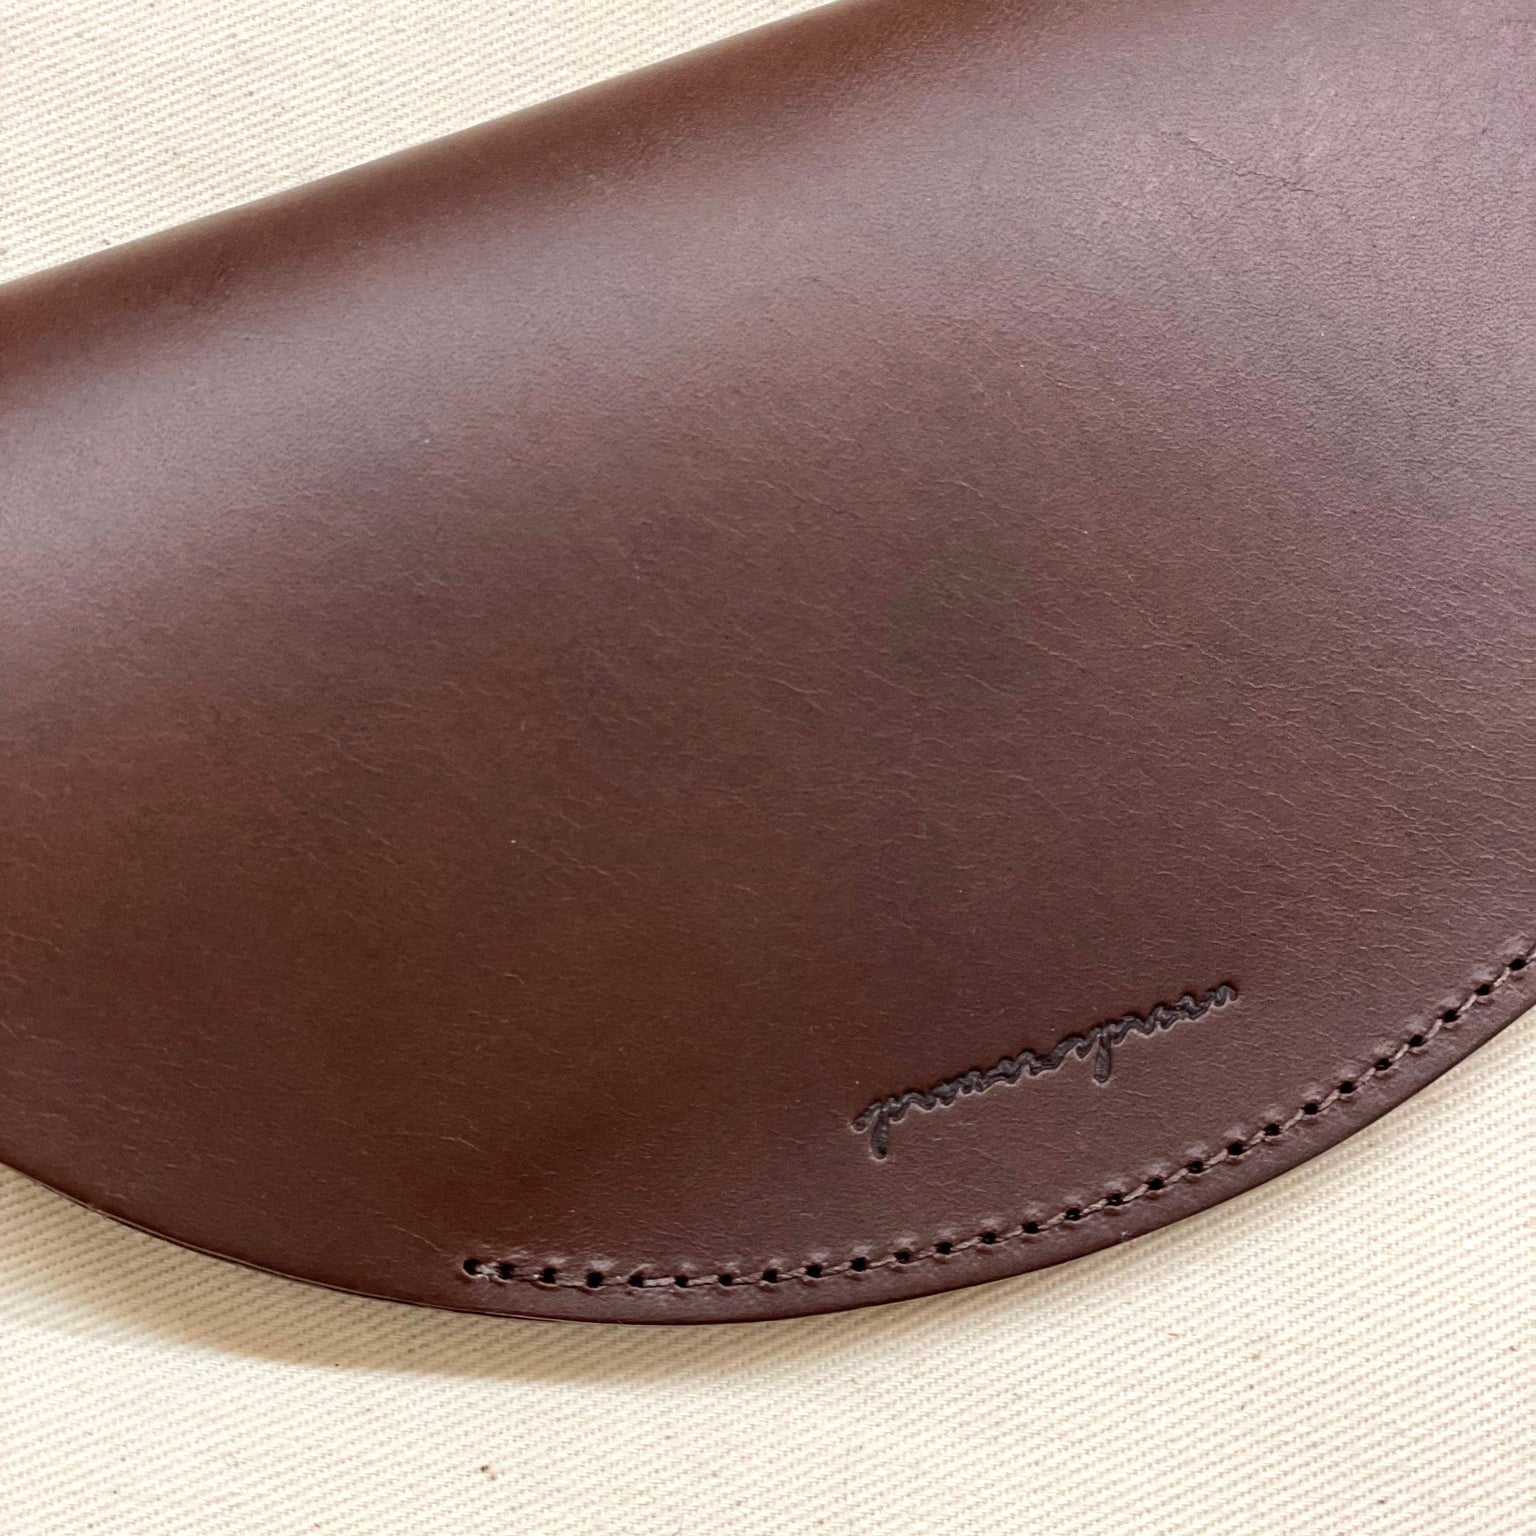 Copy of HALF MOON LEATHER PHONE CASE bag